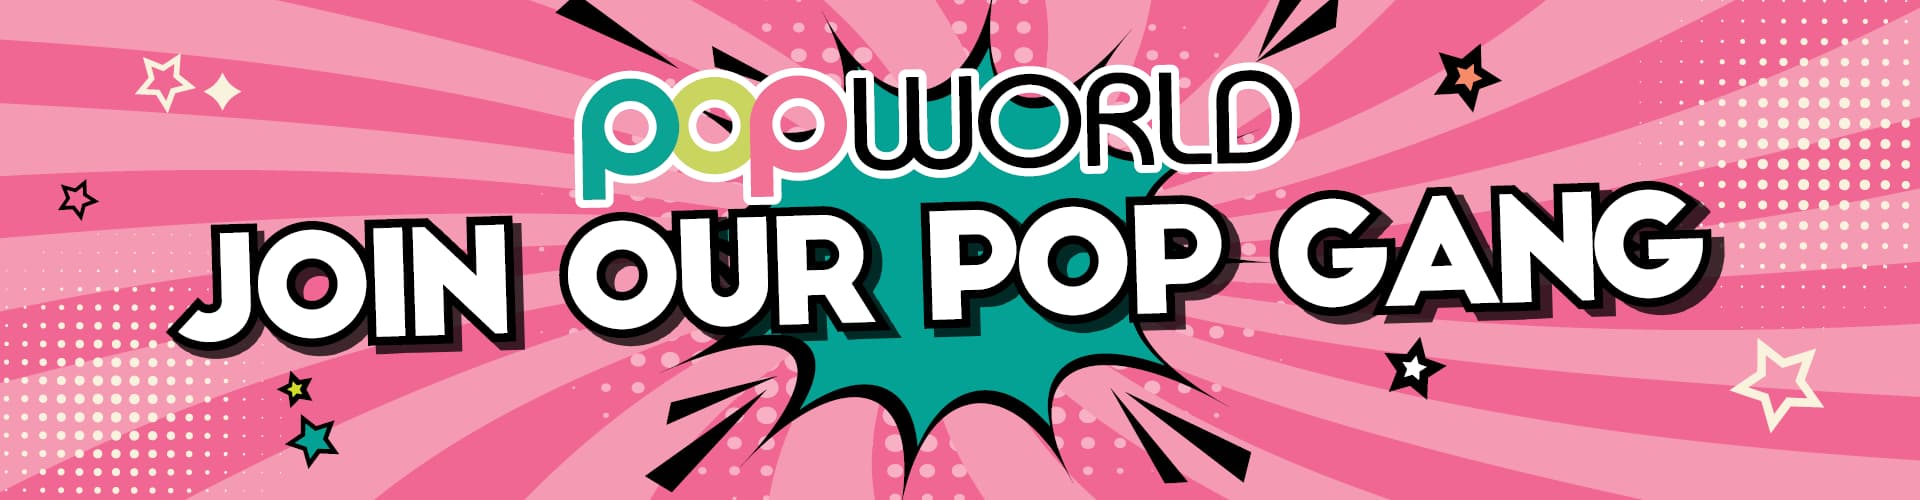 Join our Popworld Manchester gang! Sign up today